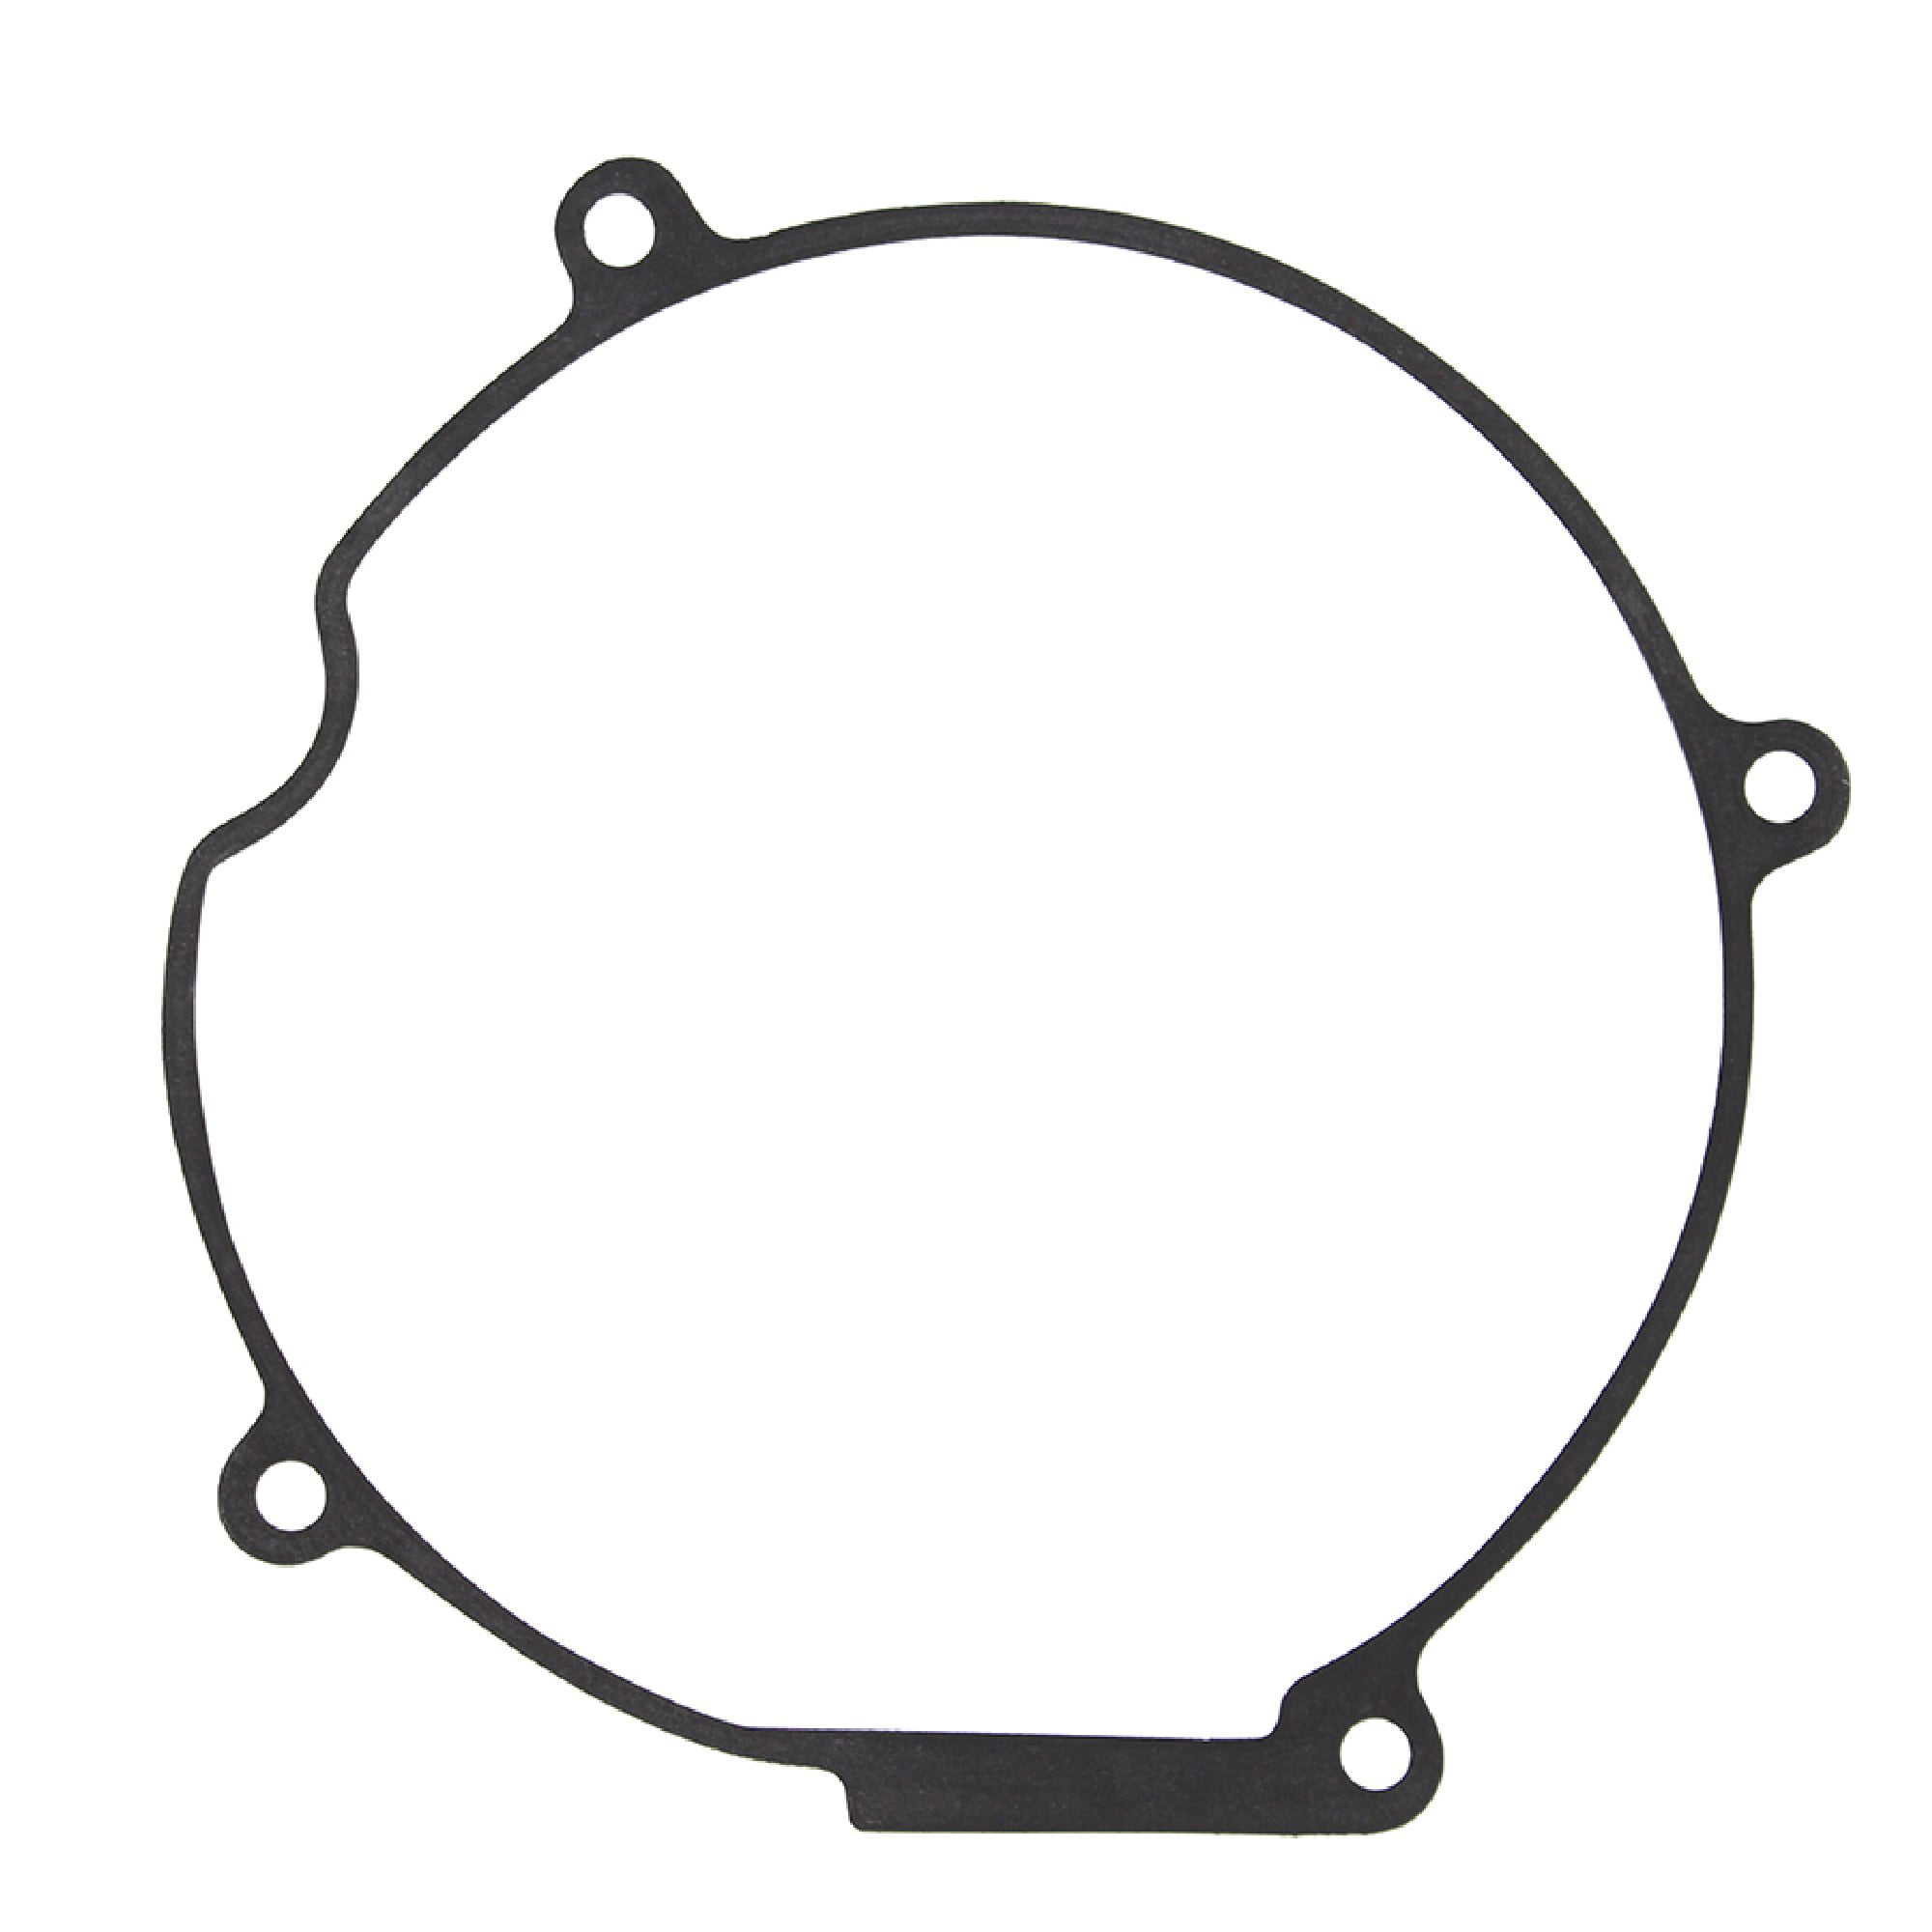 Details about   Ignition Cover Gasket For 1989 Honda CR500R Offroad Motorcycle Winderosa 817266 